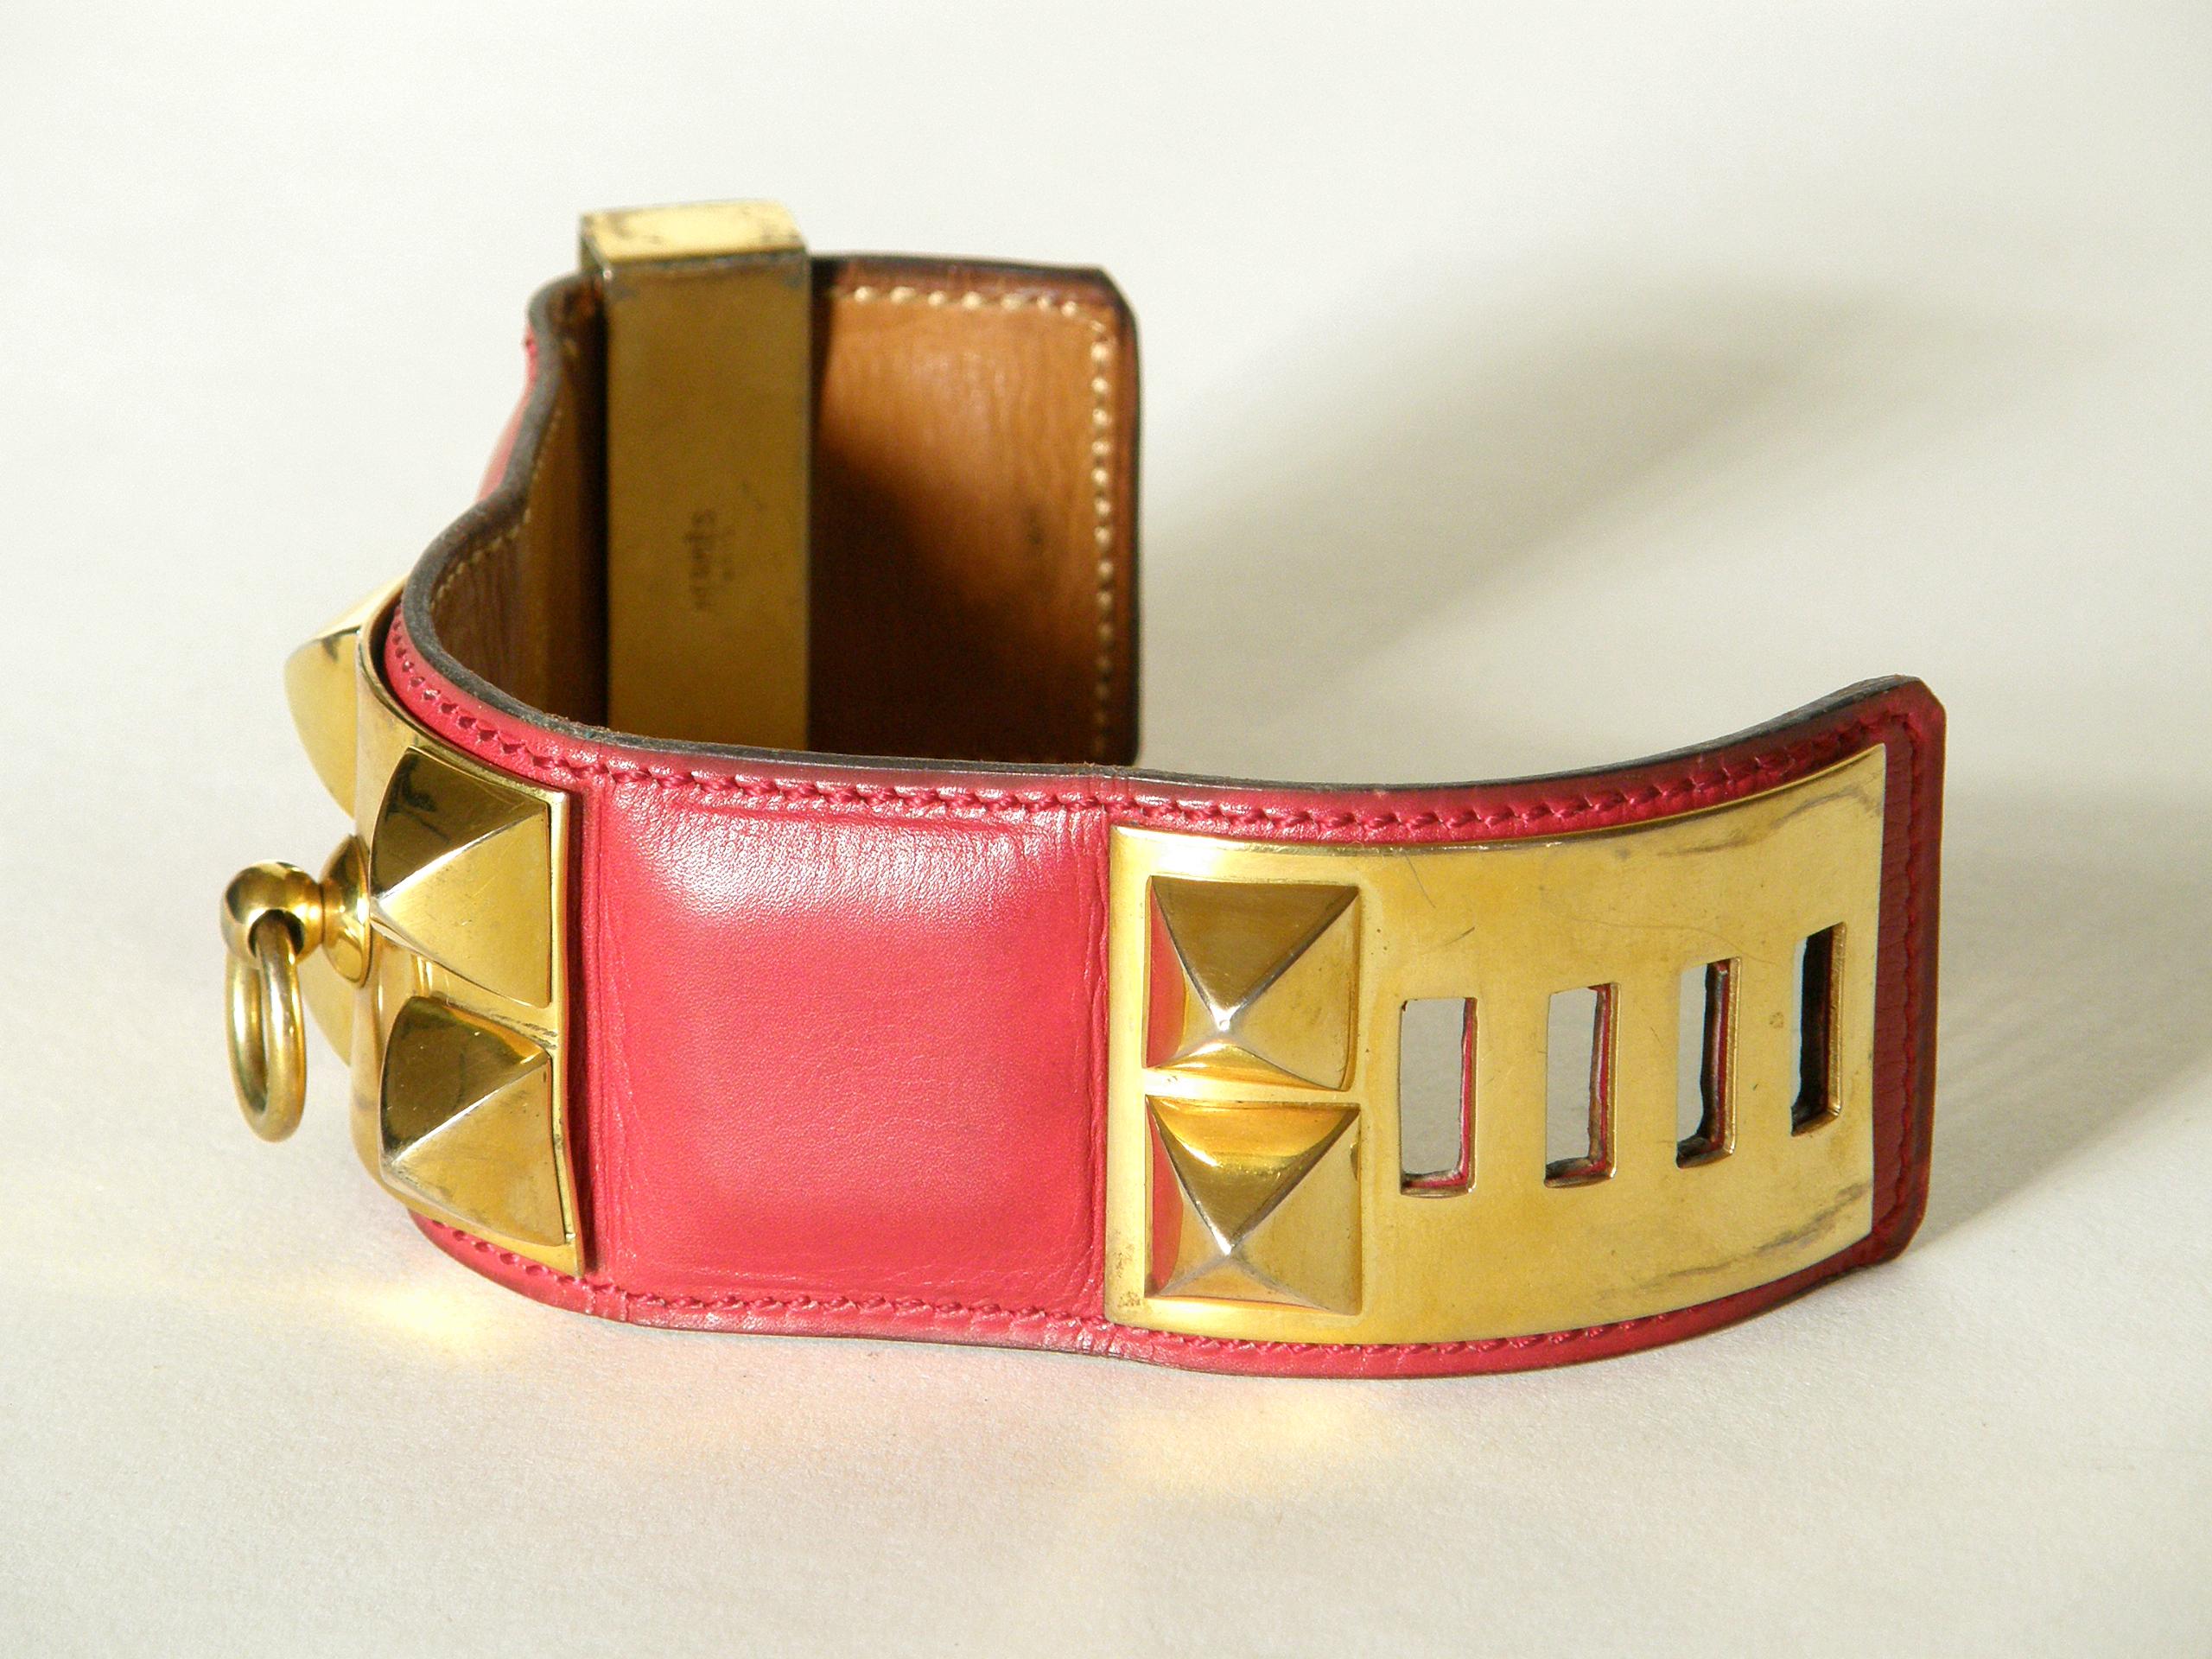 Early Hermès Collier de Chien Cuff Bracelet Red Leather CDC with Gold Hardware In Good Condition For Sale In Chicago, IL